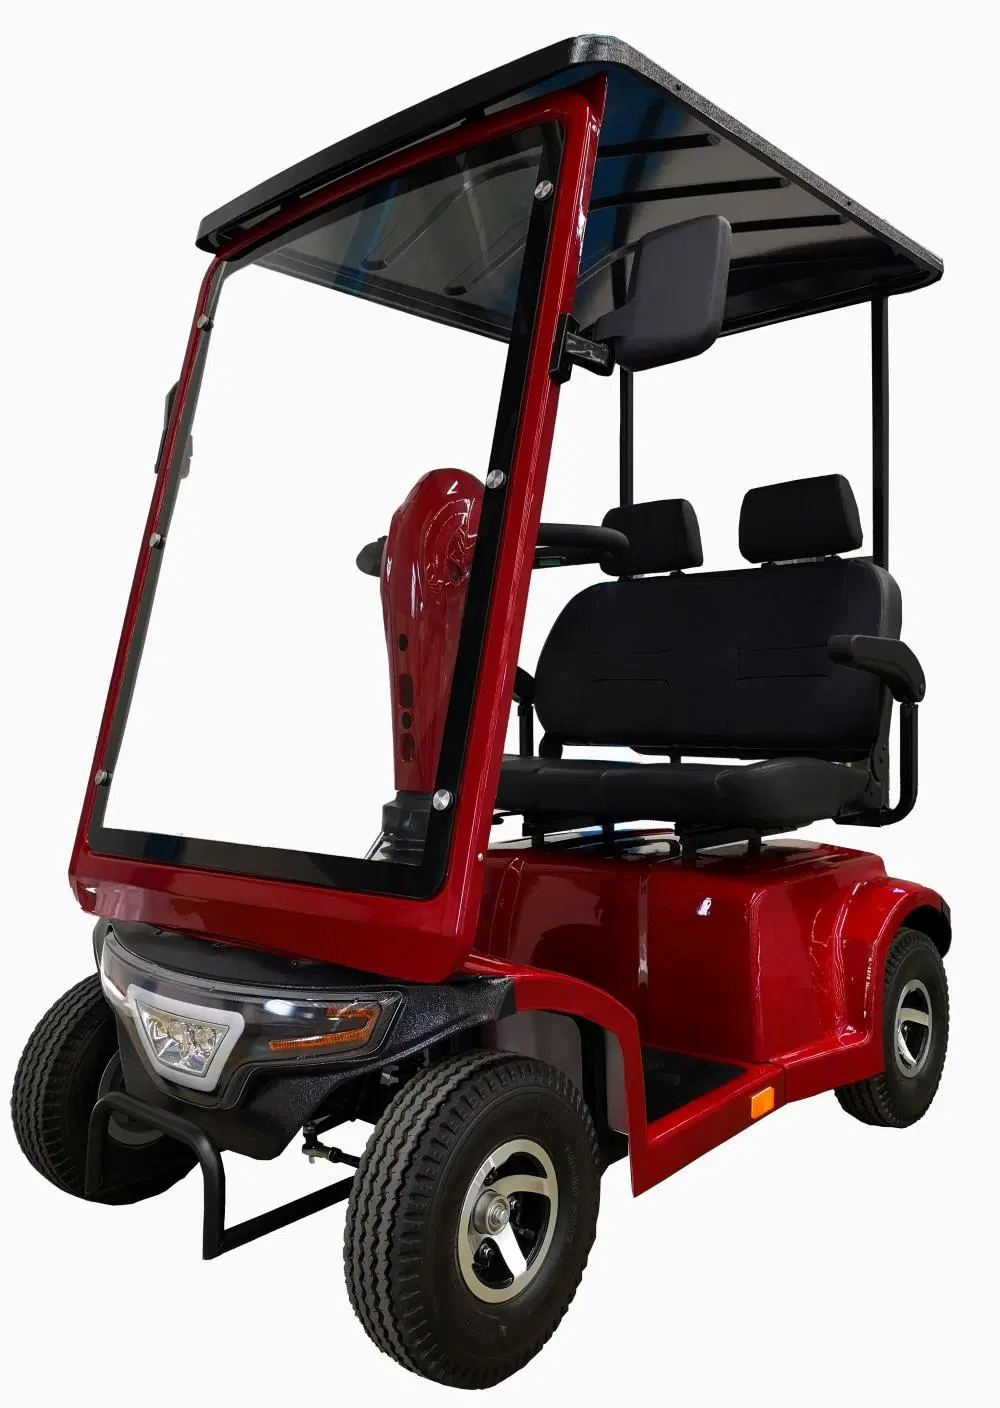 Four Wheel Mobility Scooter with Detachable Canopy Windscreen for Rainy Day